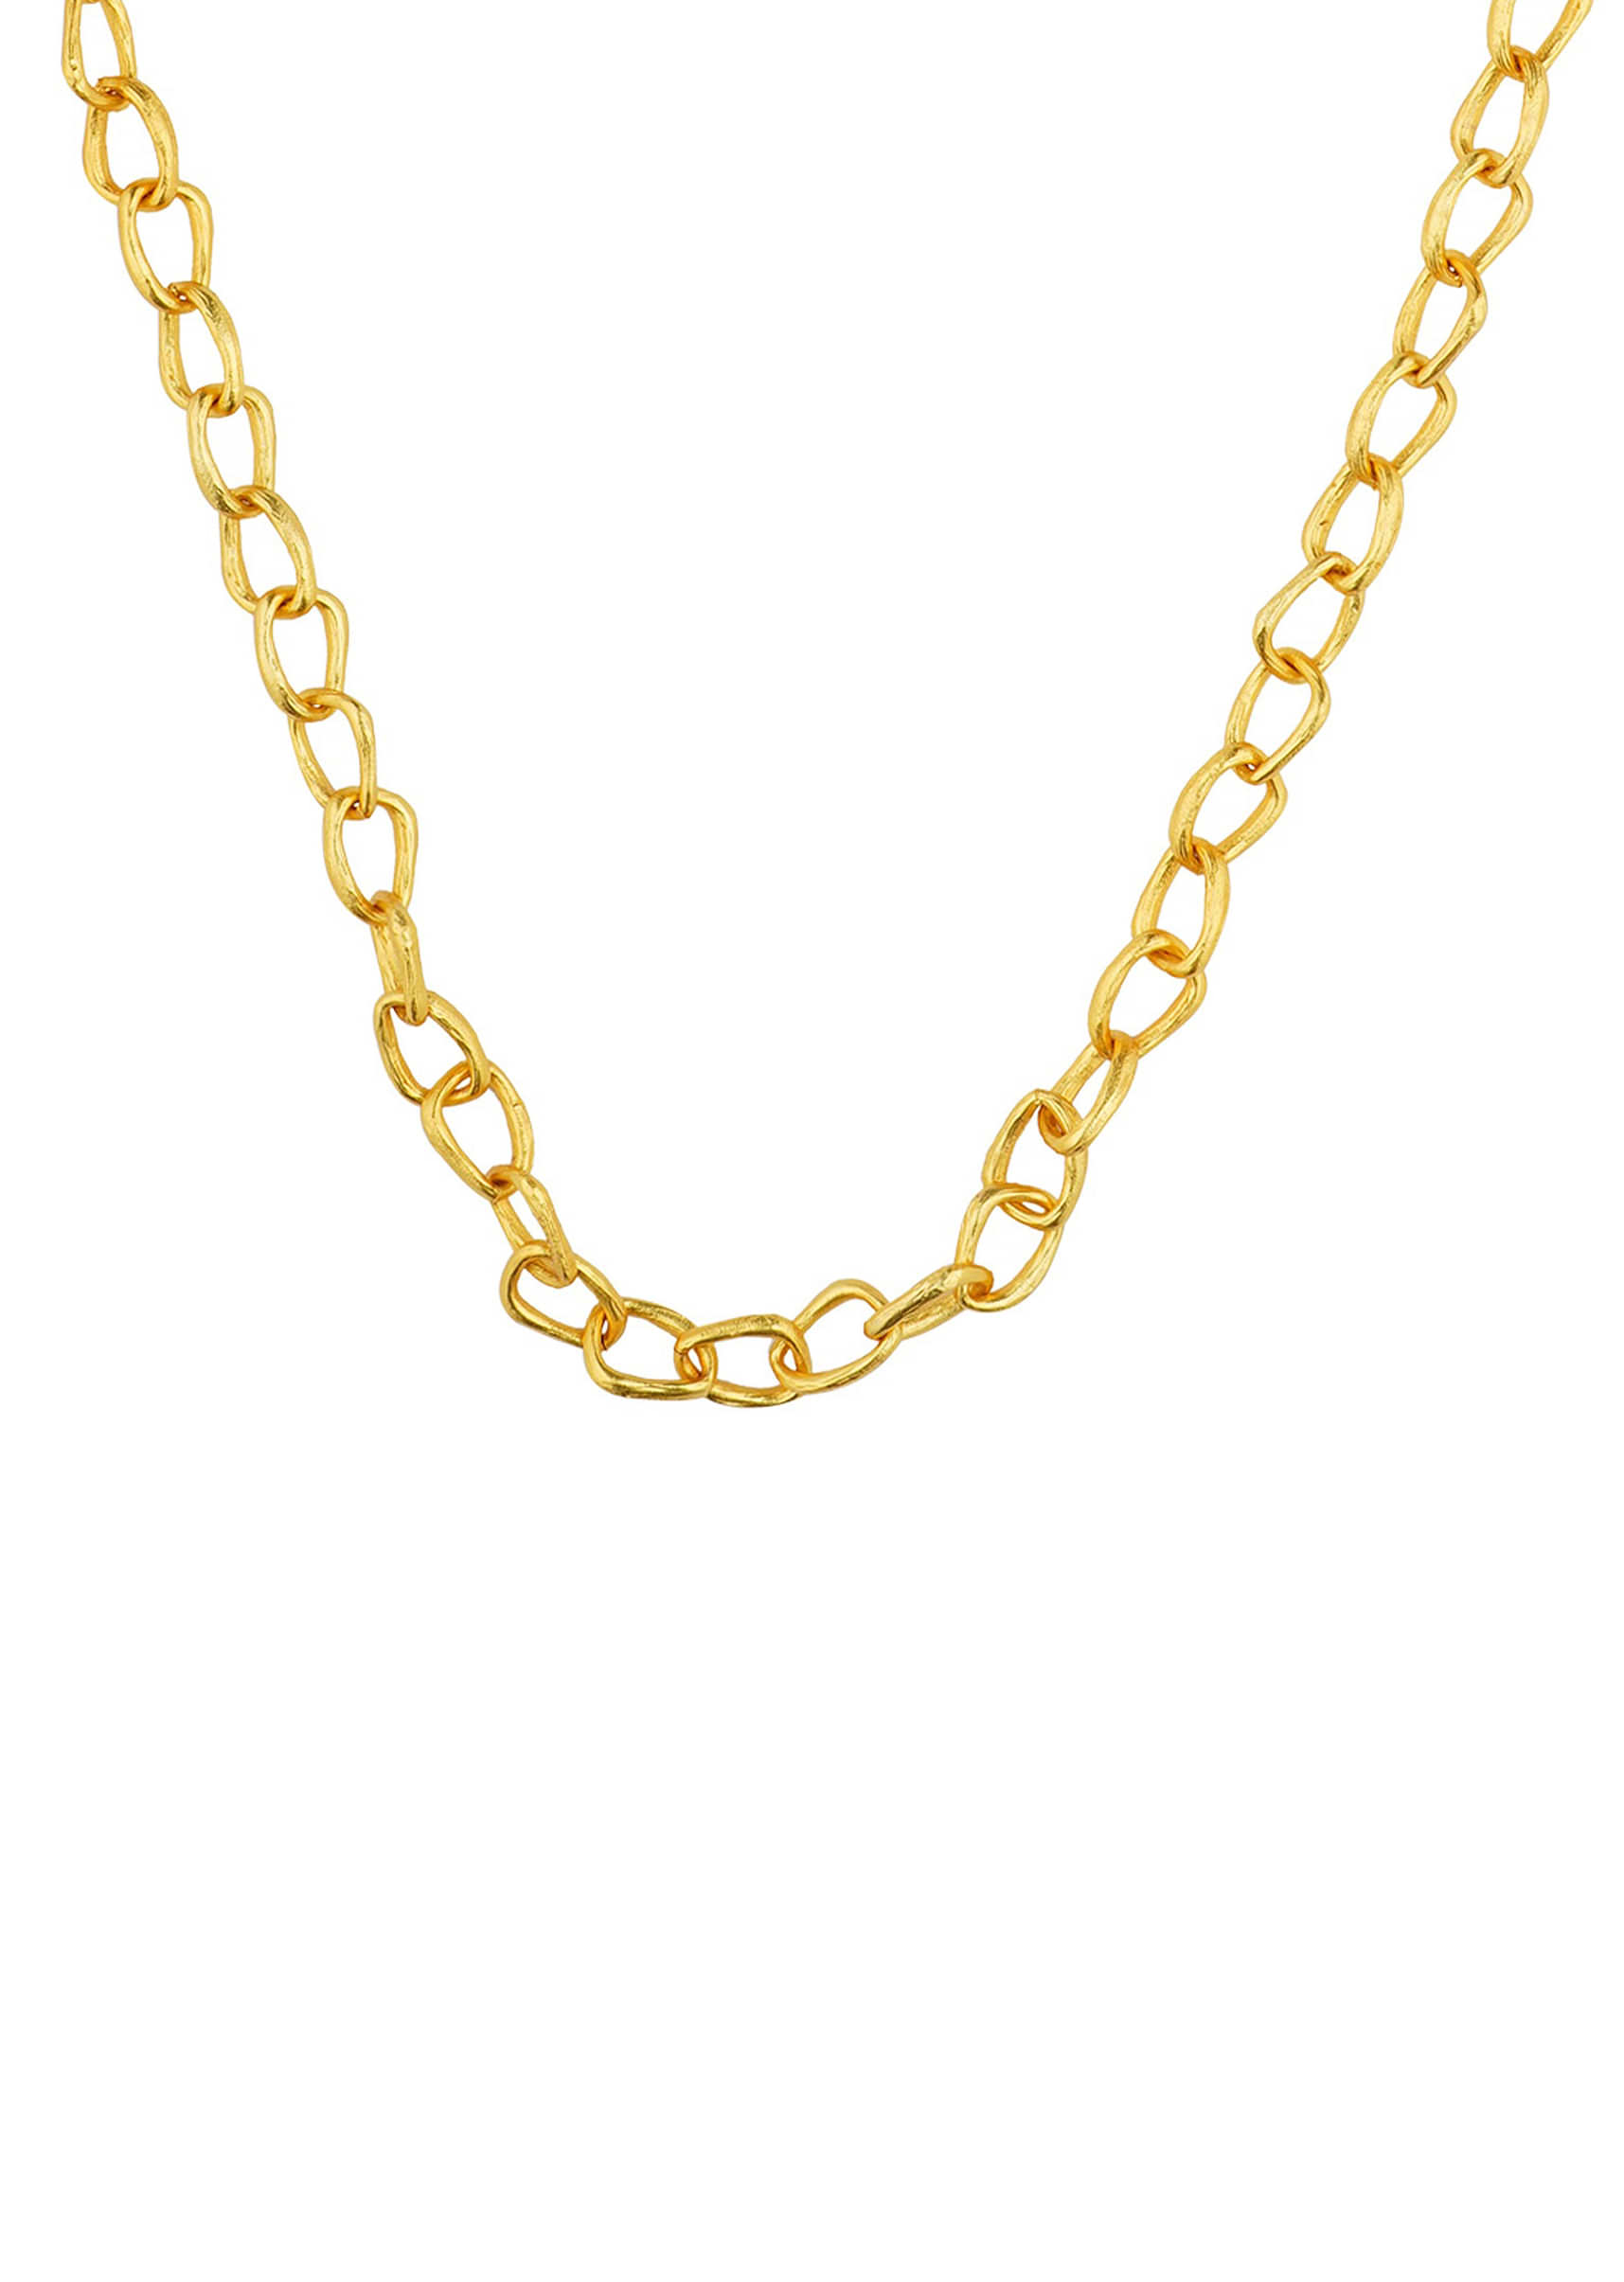 22k Gold Plated Moody Statement Goldtone Link Necklace